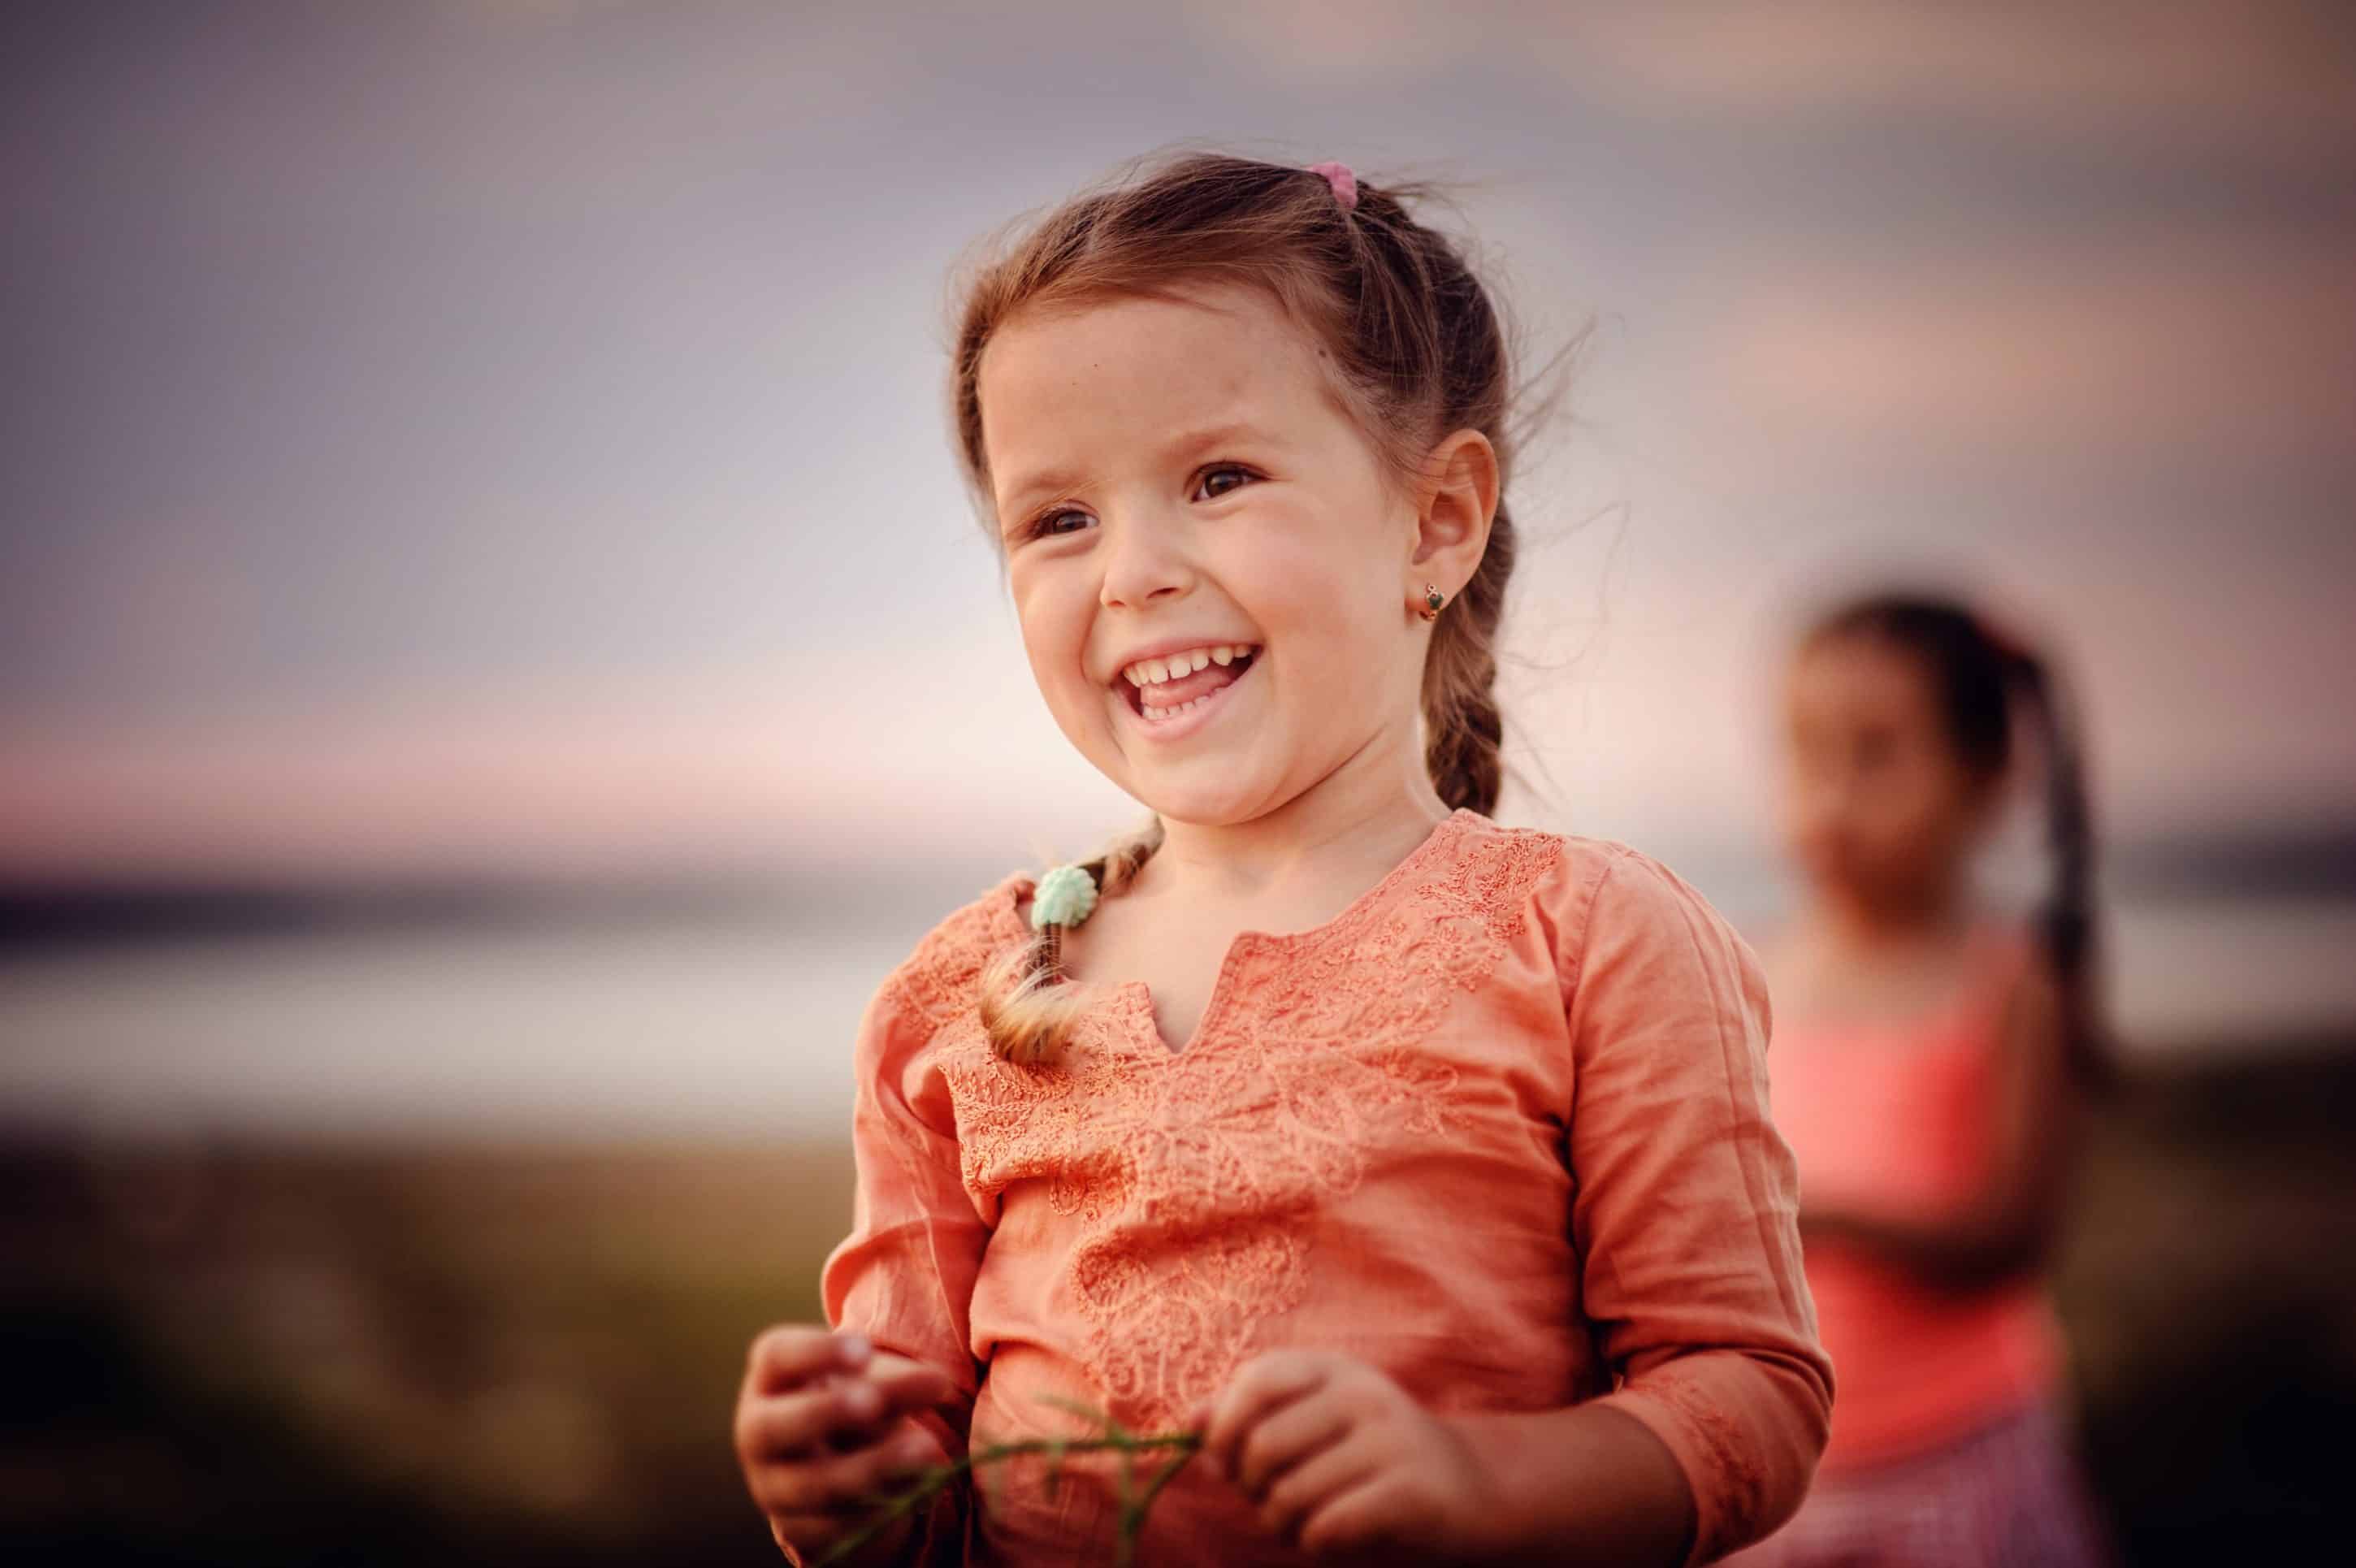 toddler girl smiling while holding a flower